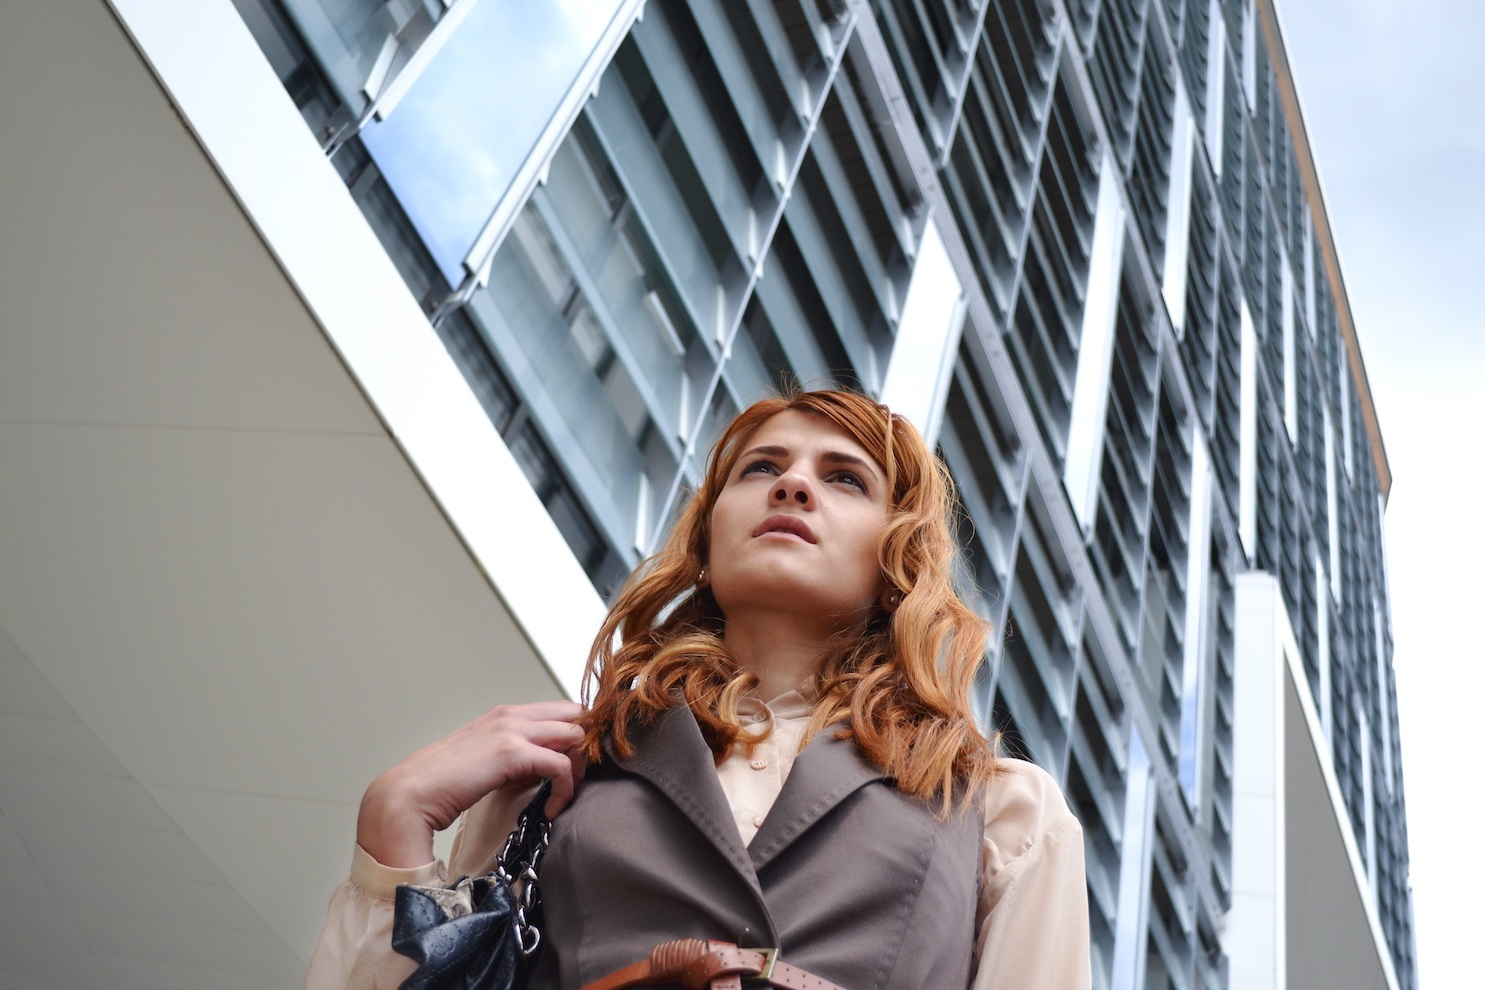 A woman in professional dress outside an office building, shot from below